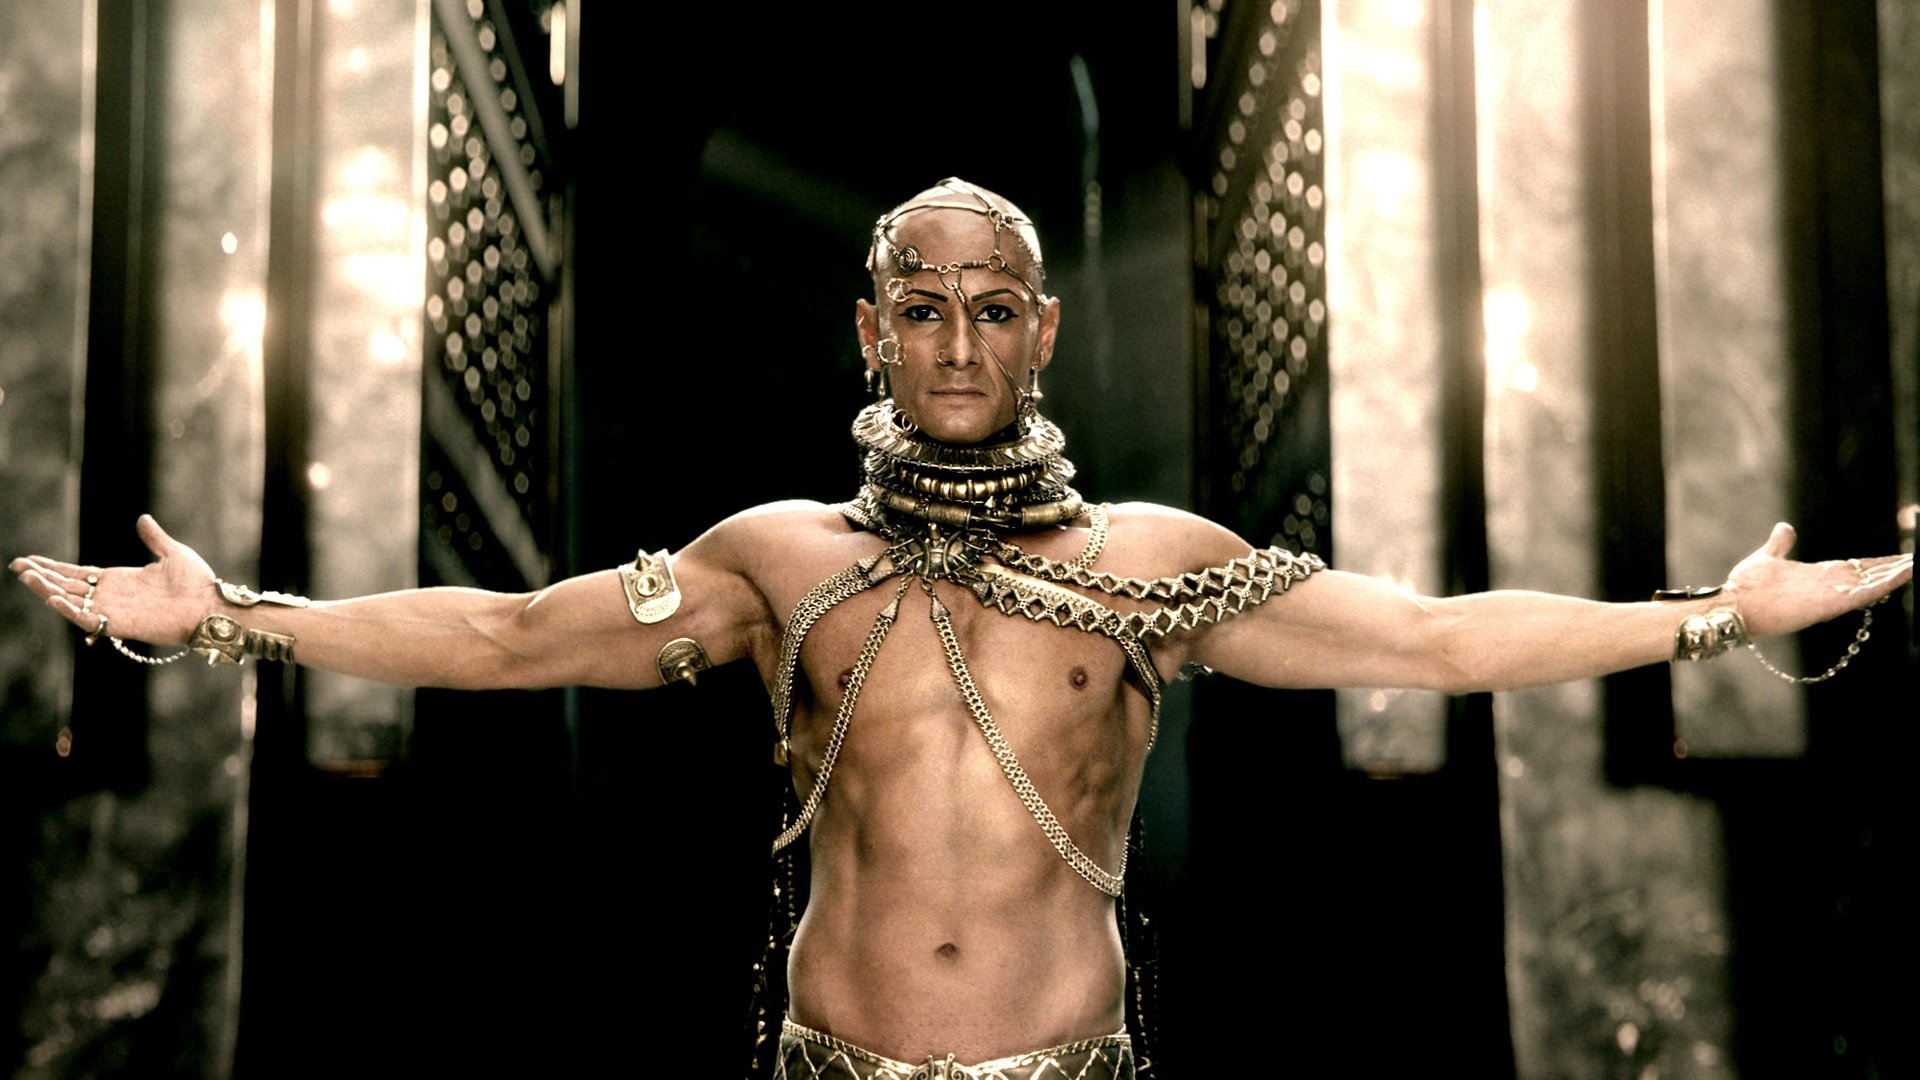 300 rise of an empire movie backdrops